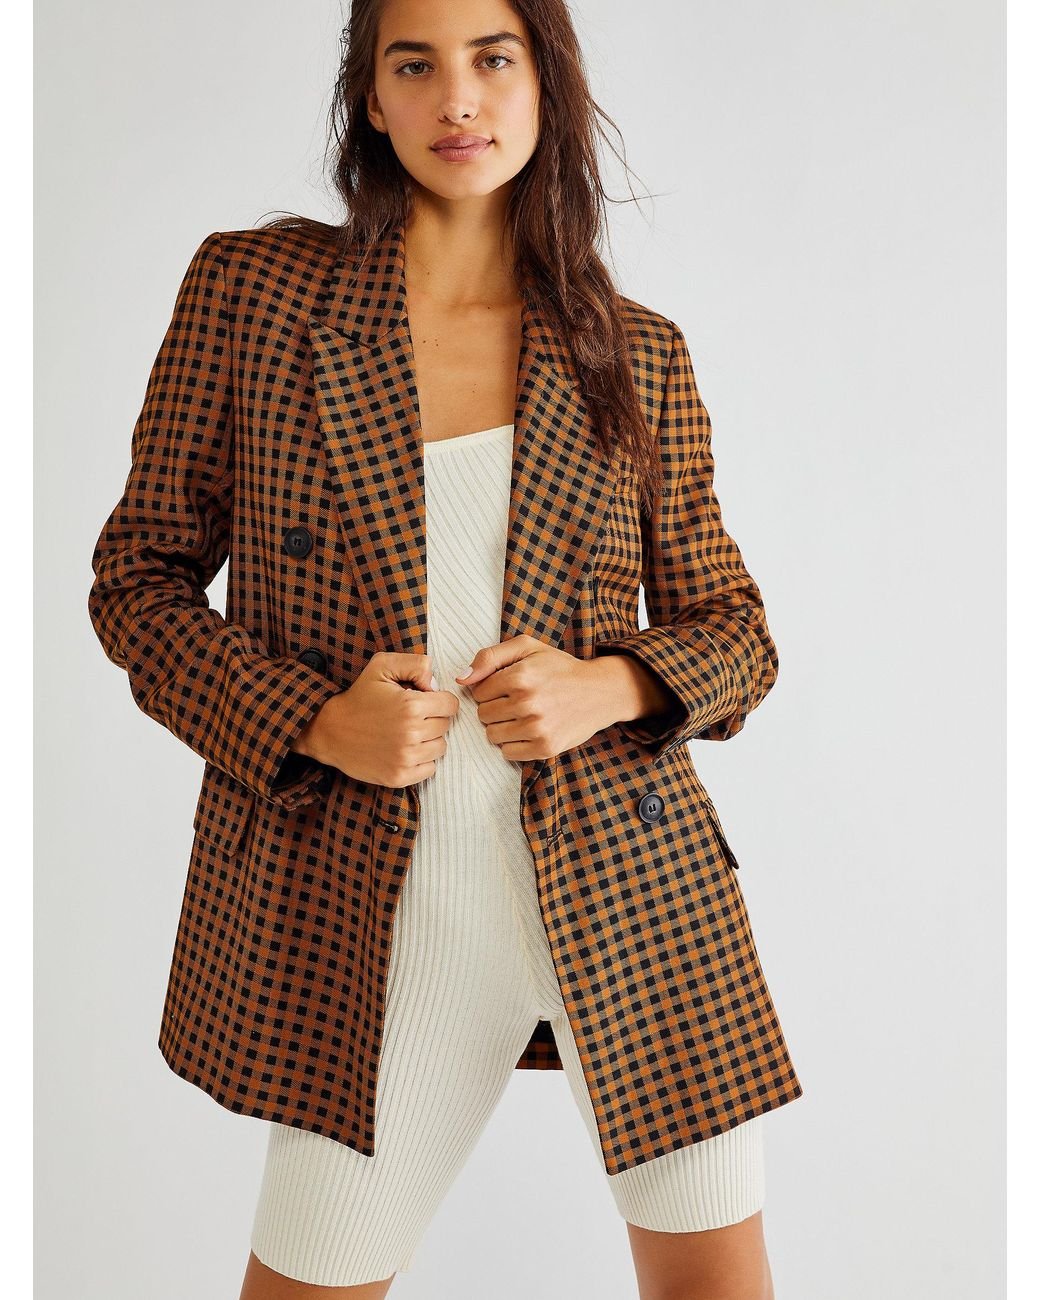 Free People Ashby Plaid Blazer in Brown | Lyst